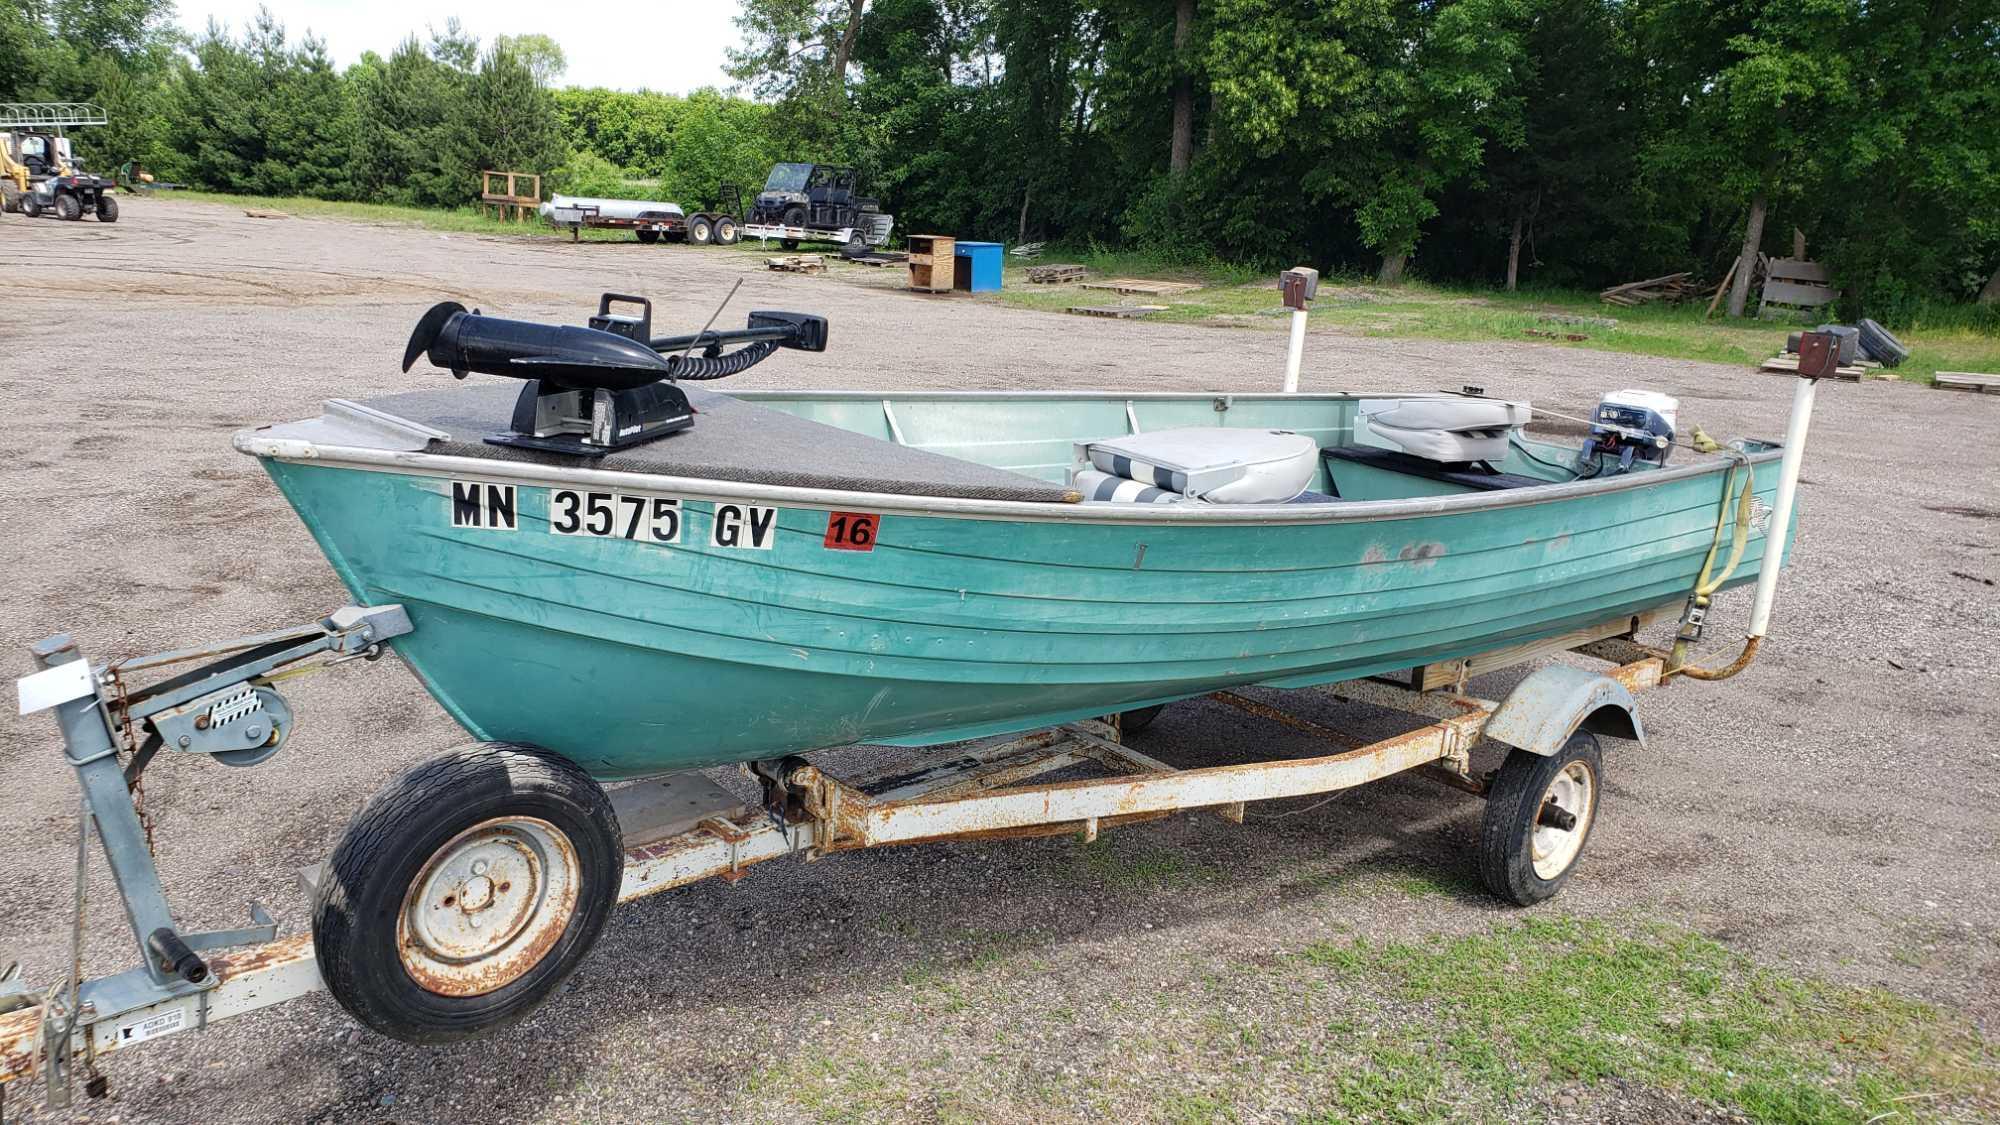 16' Crestliner with Evinrude 15hp and trolling motor (both run) on 1996 Hom